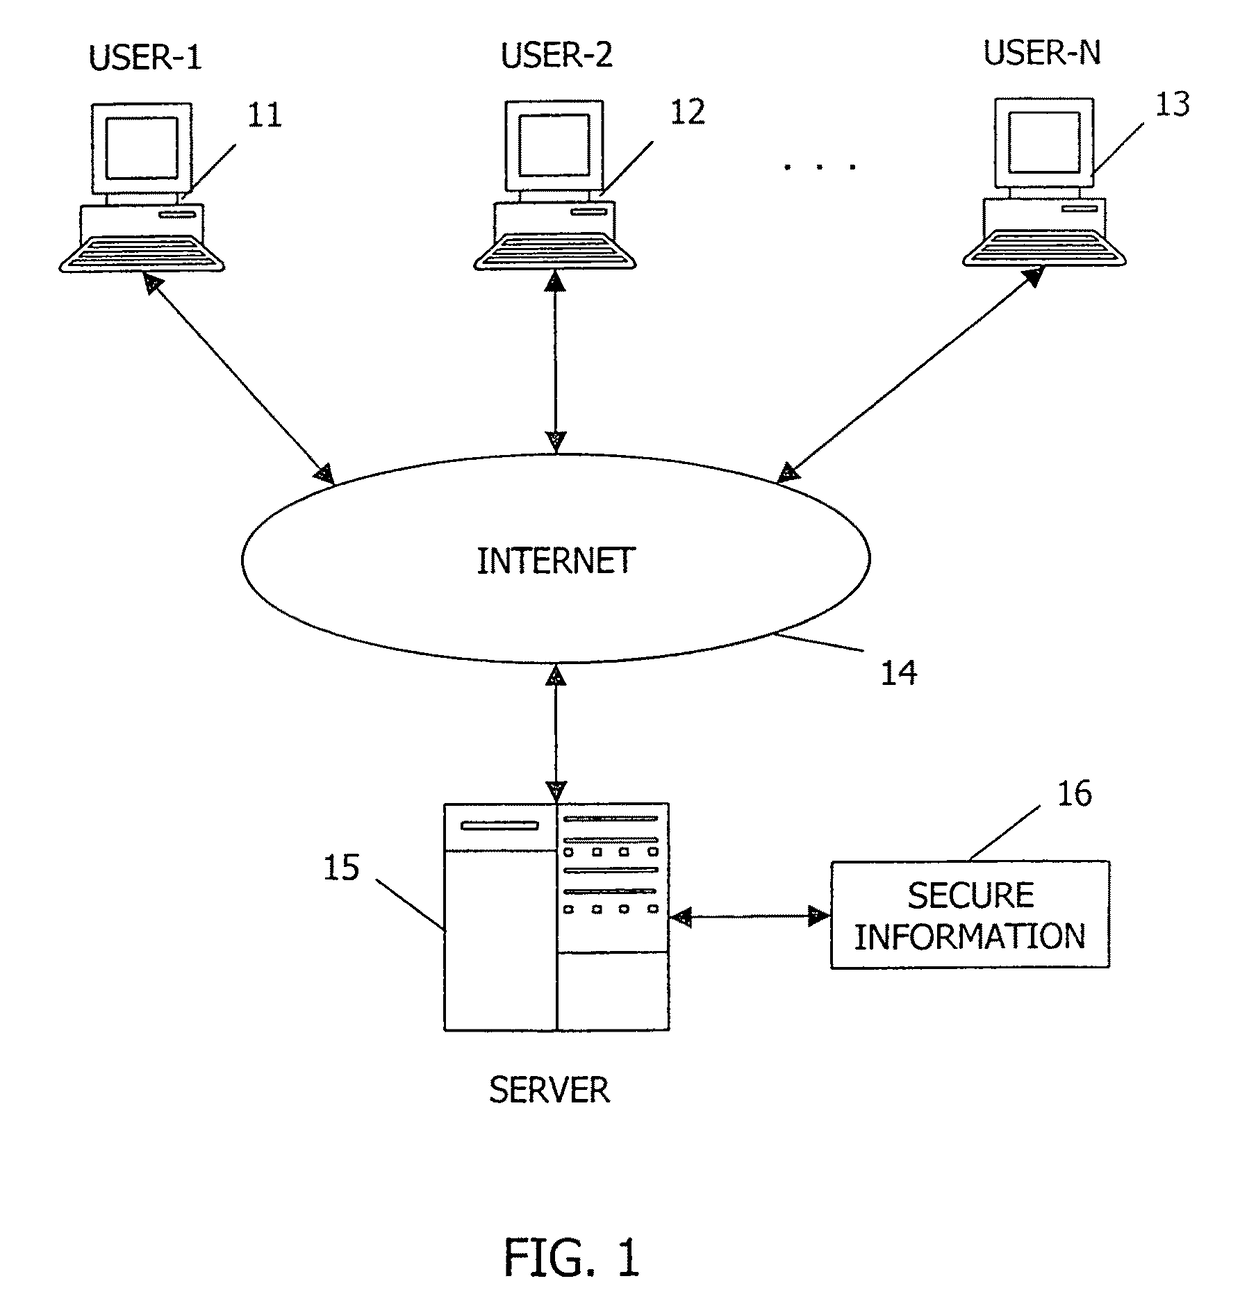 Apparatus, system, and method for generating and authenticating a computer password